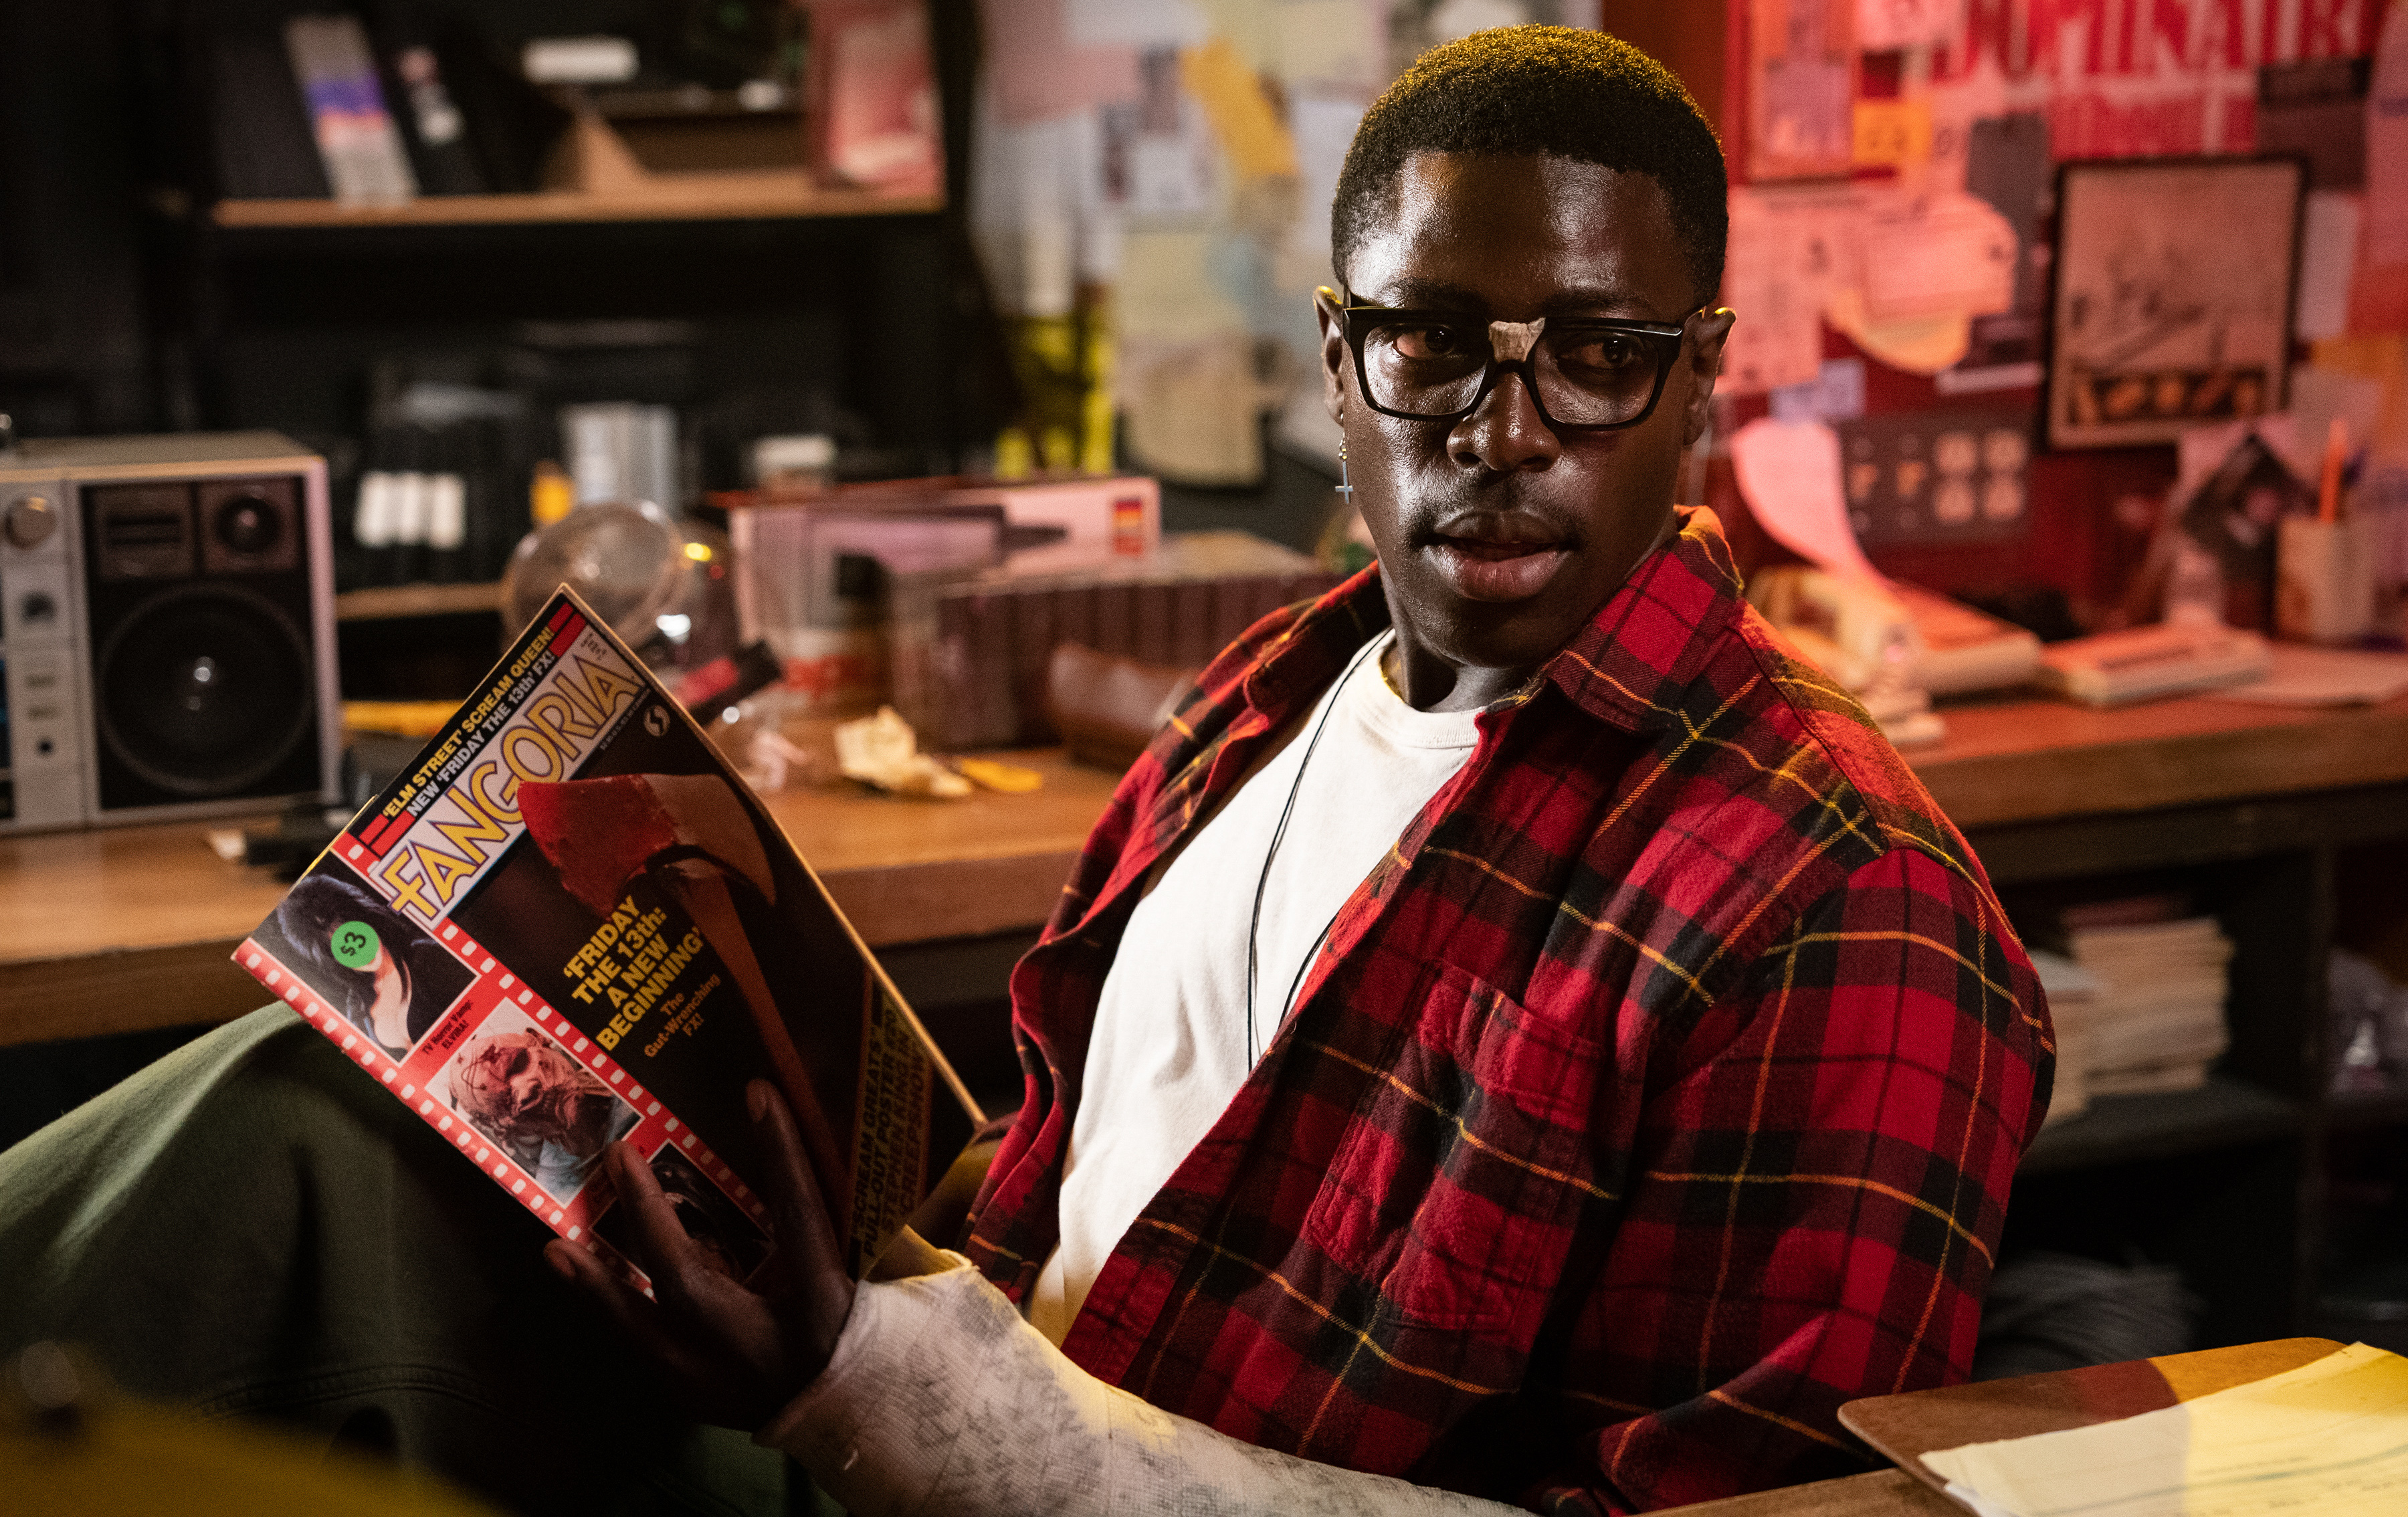 Leon (Moses Sumney) sits behind the counter of his video rental shop, reading Fangora, in Ti West’s Maxxxine